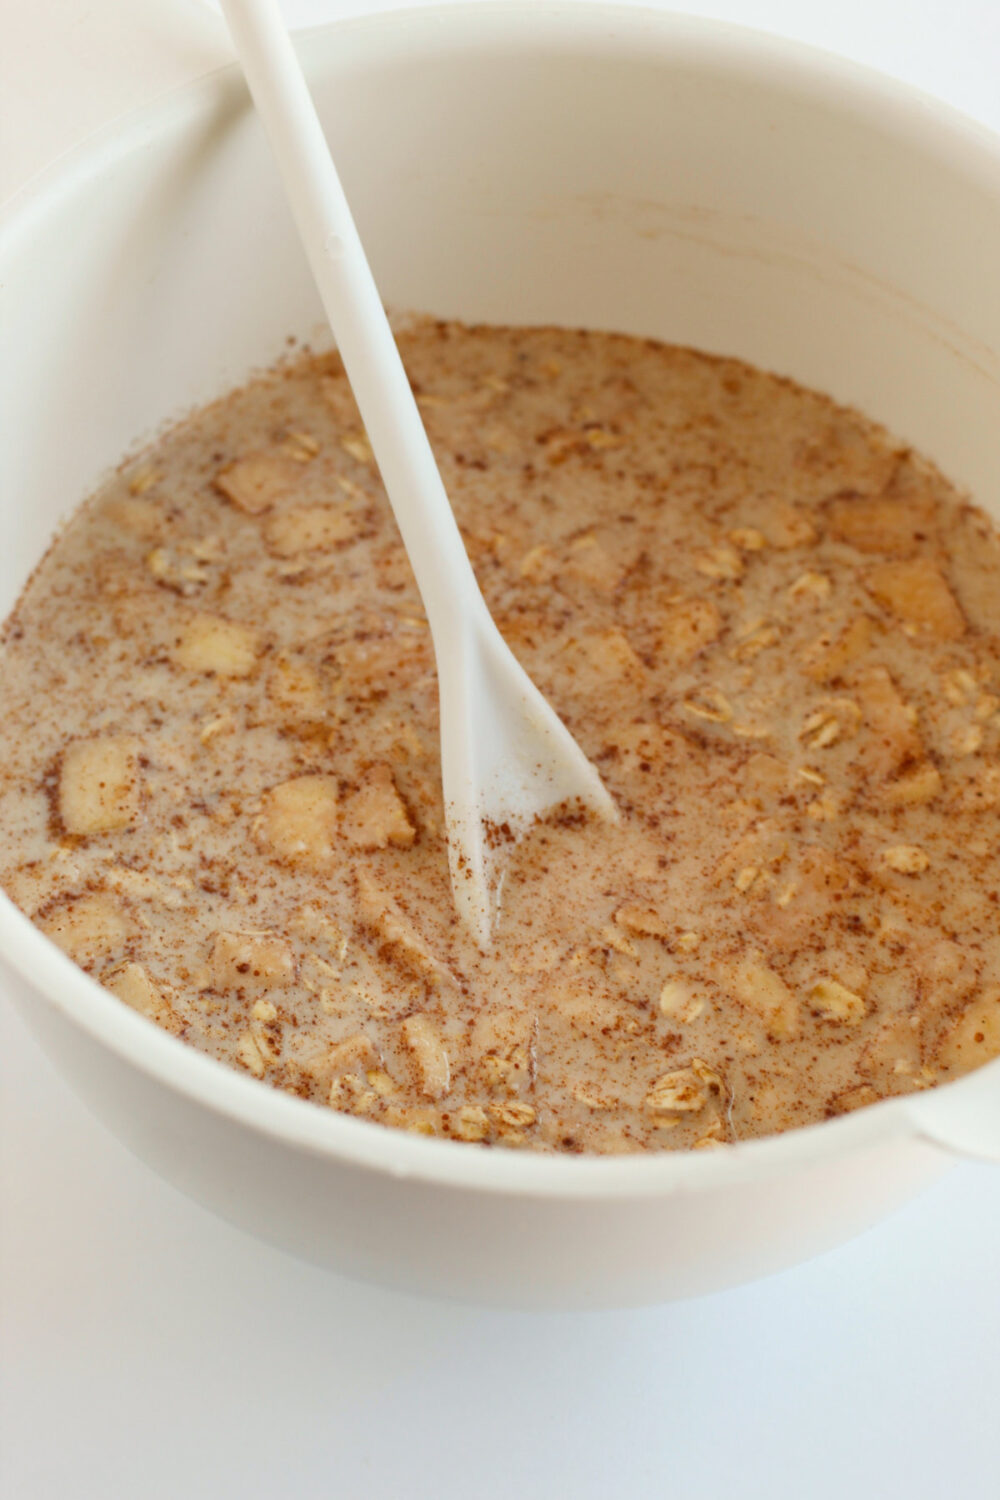 Oats and apples mixed together. 